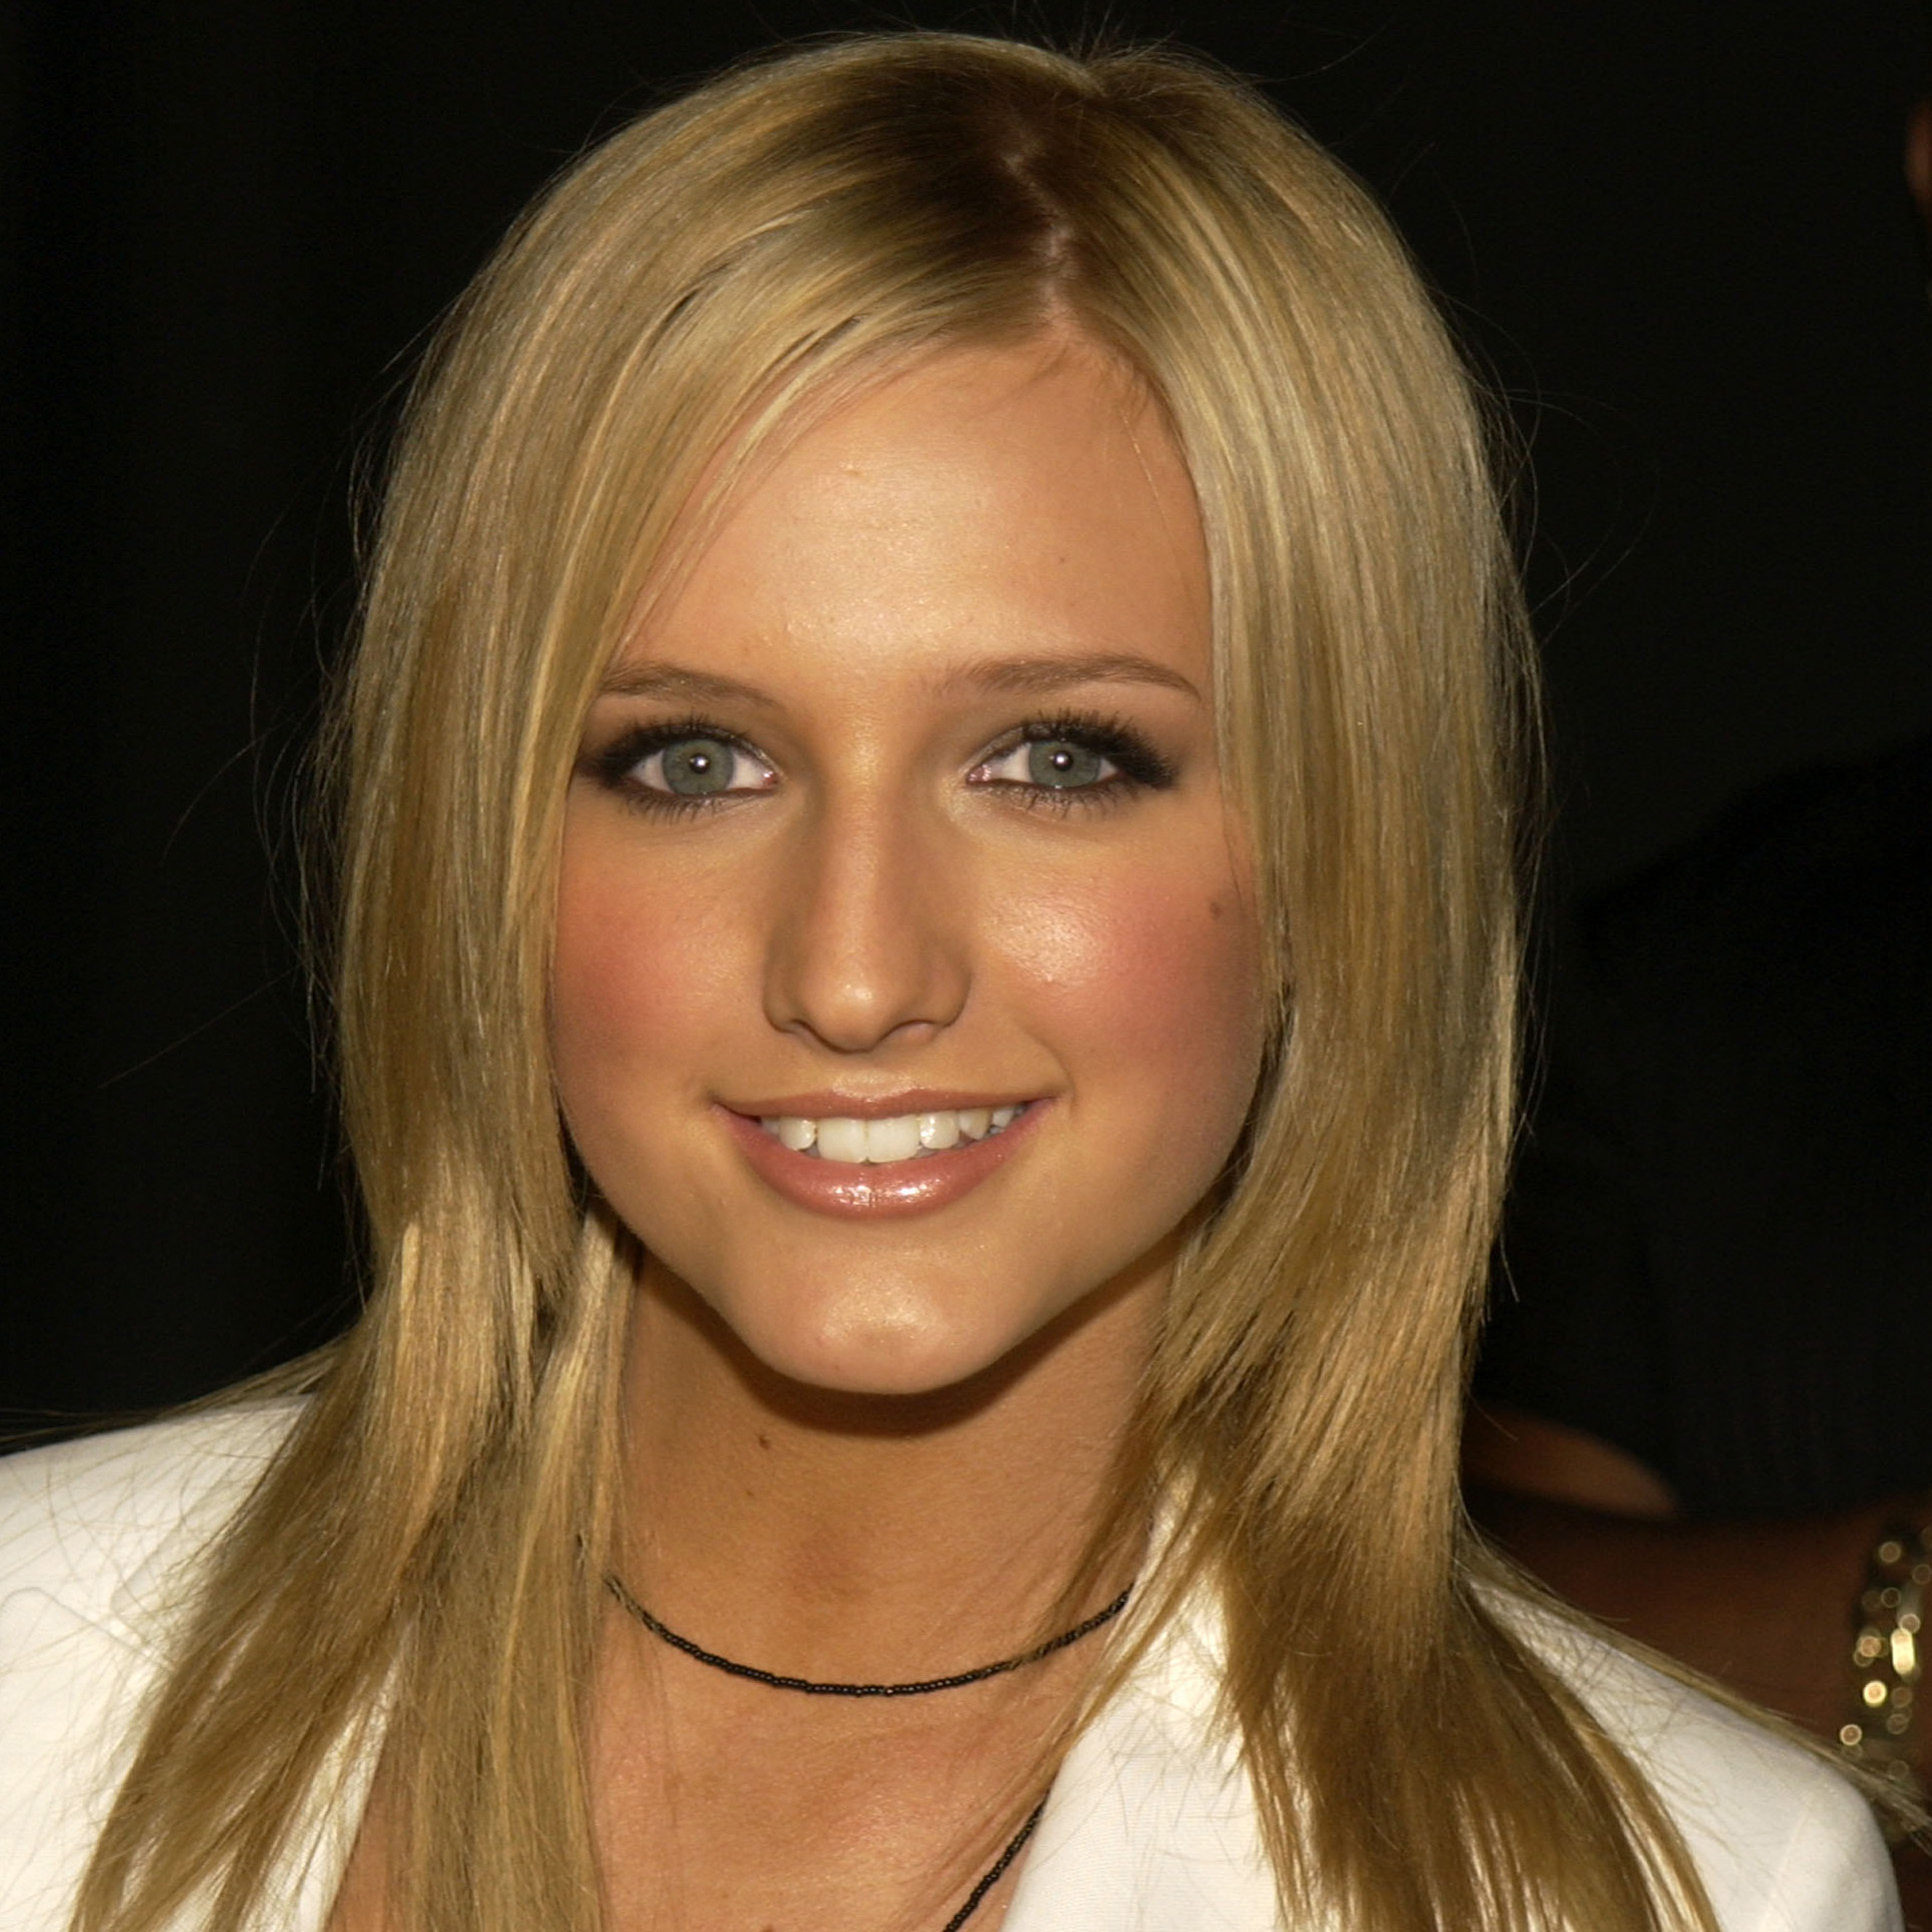 Ashlee Simpson Sex - Ashlee Simpson's Transformation and Plastic Surgery Speculation